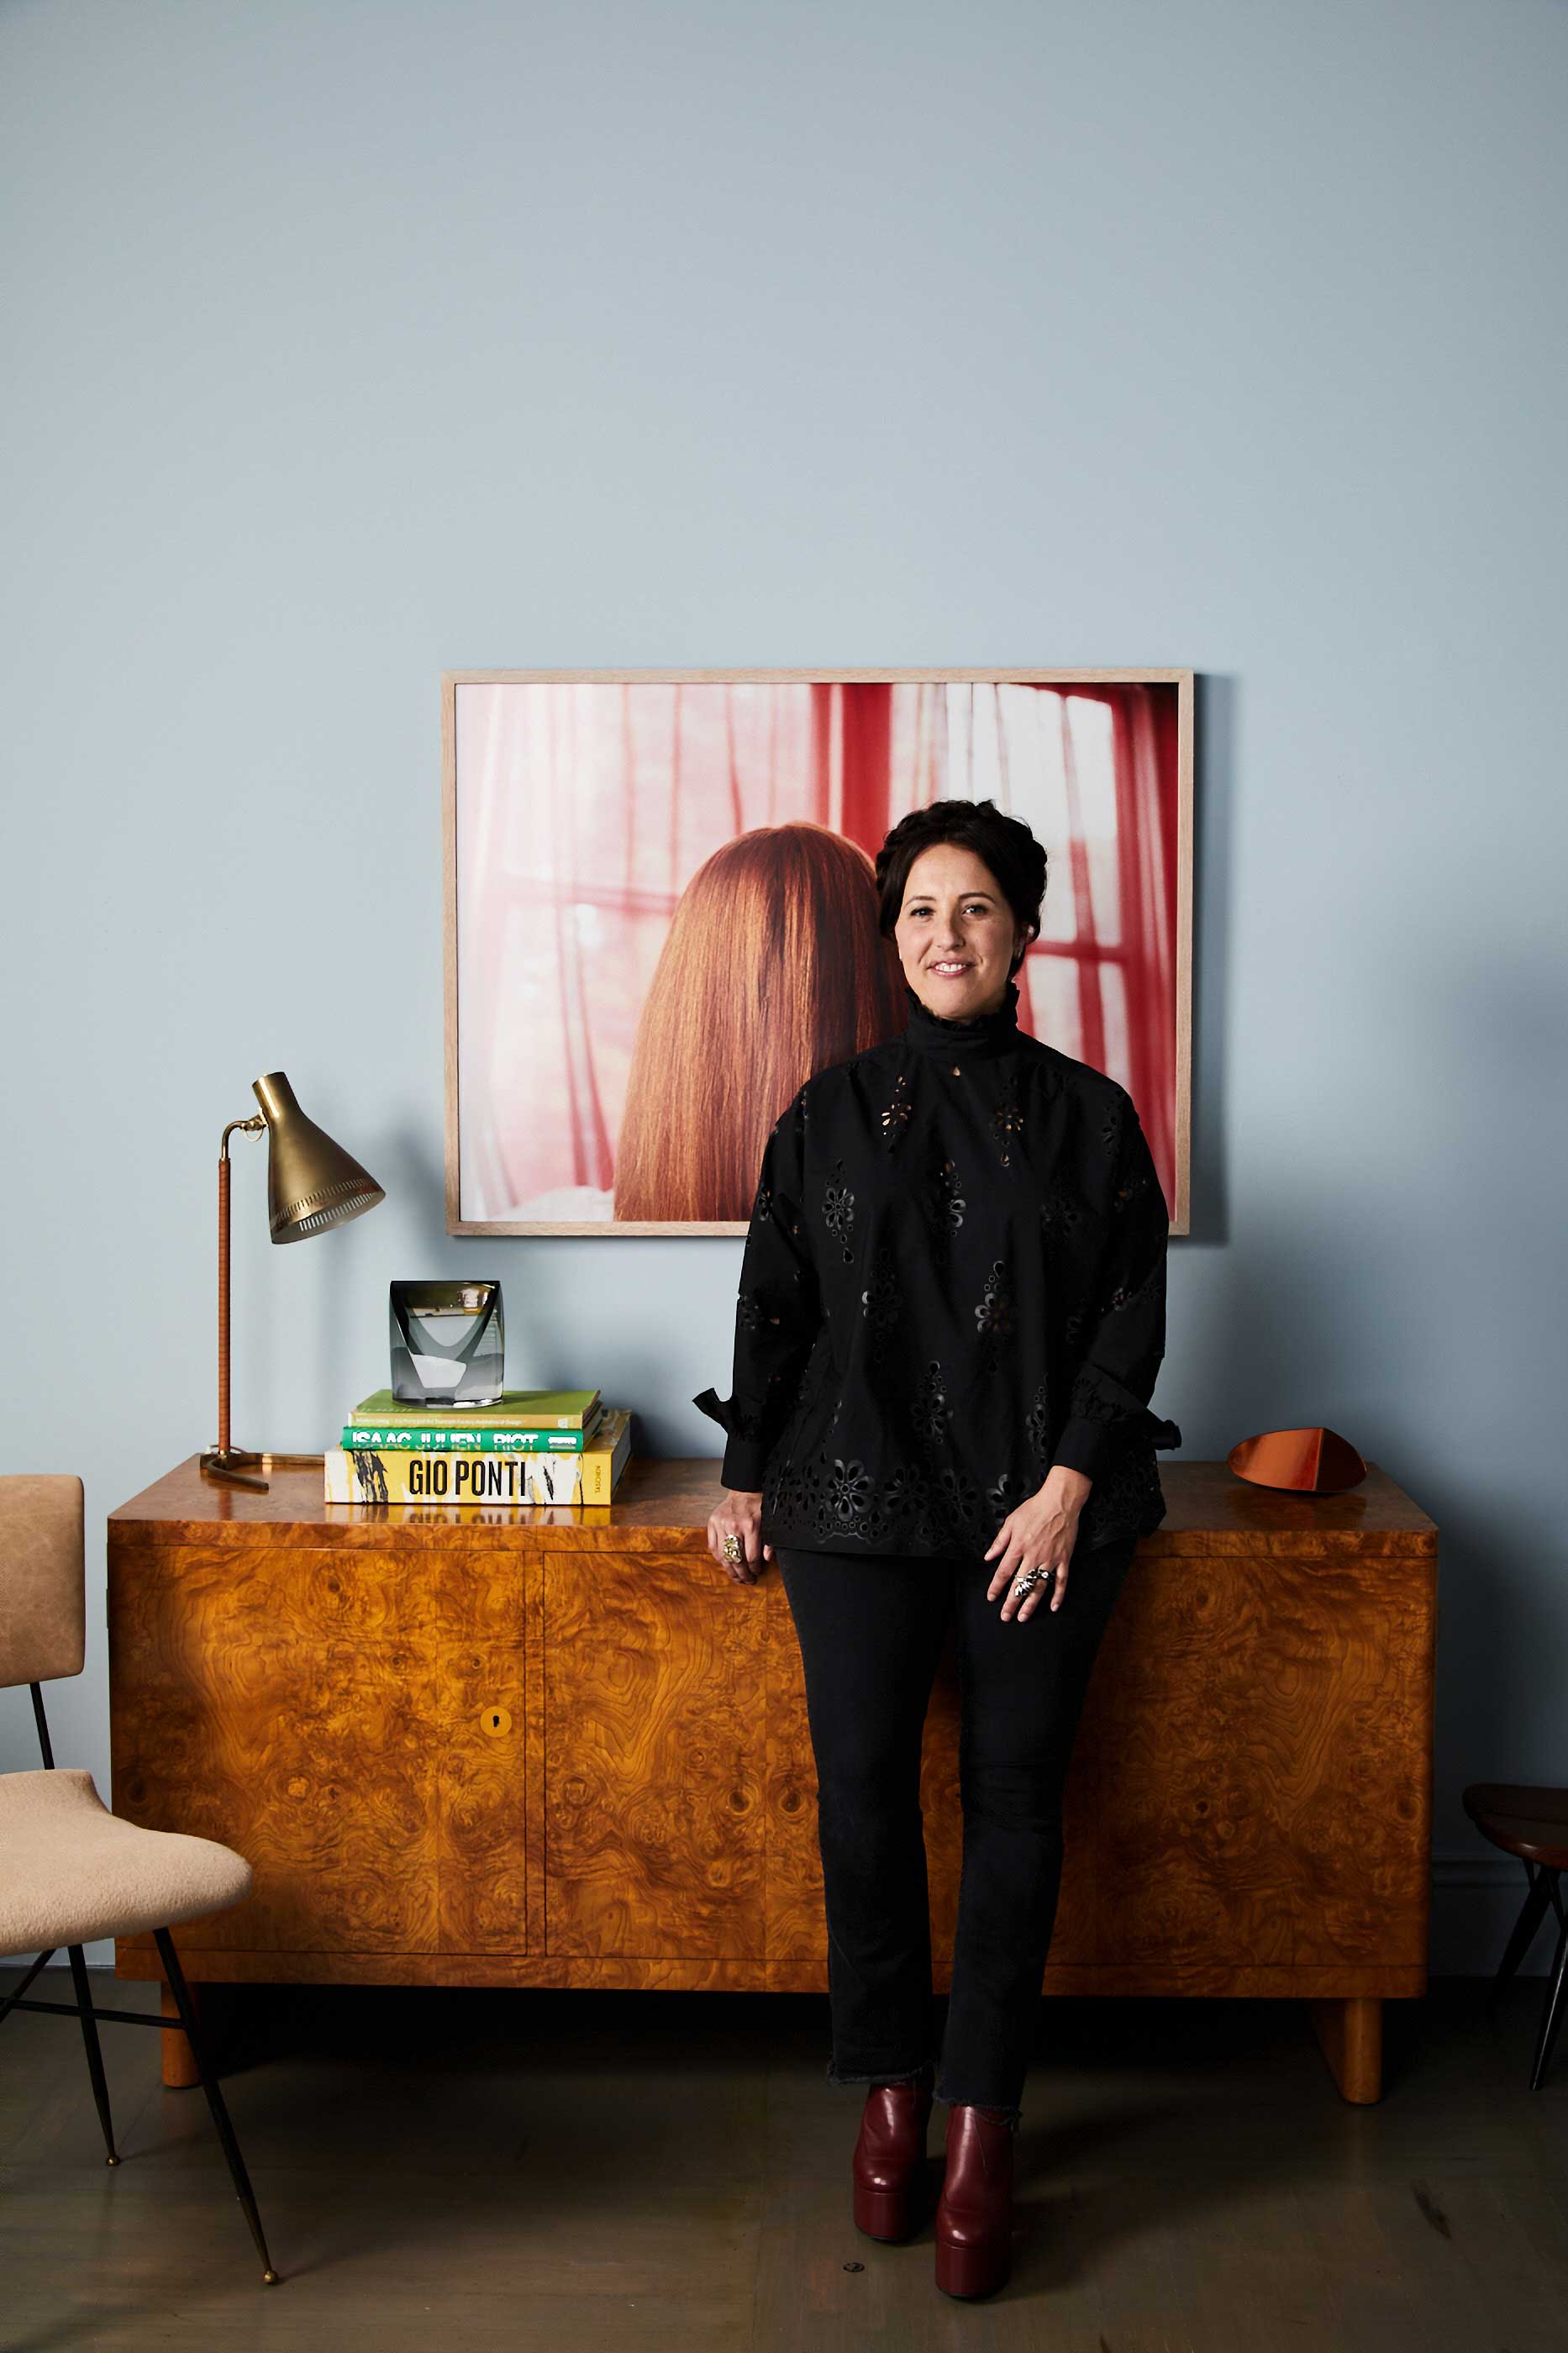 A woman dressed in black standing in front of a wood credenza, red photographic artwork, and pale blue wall